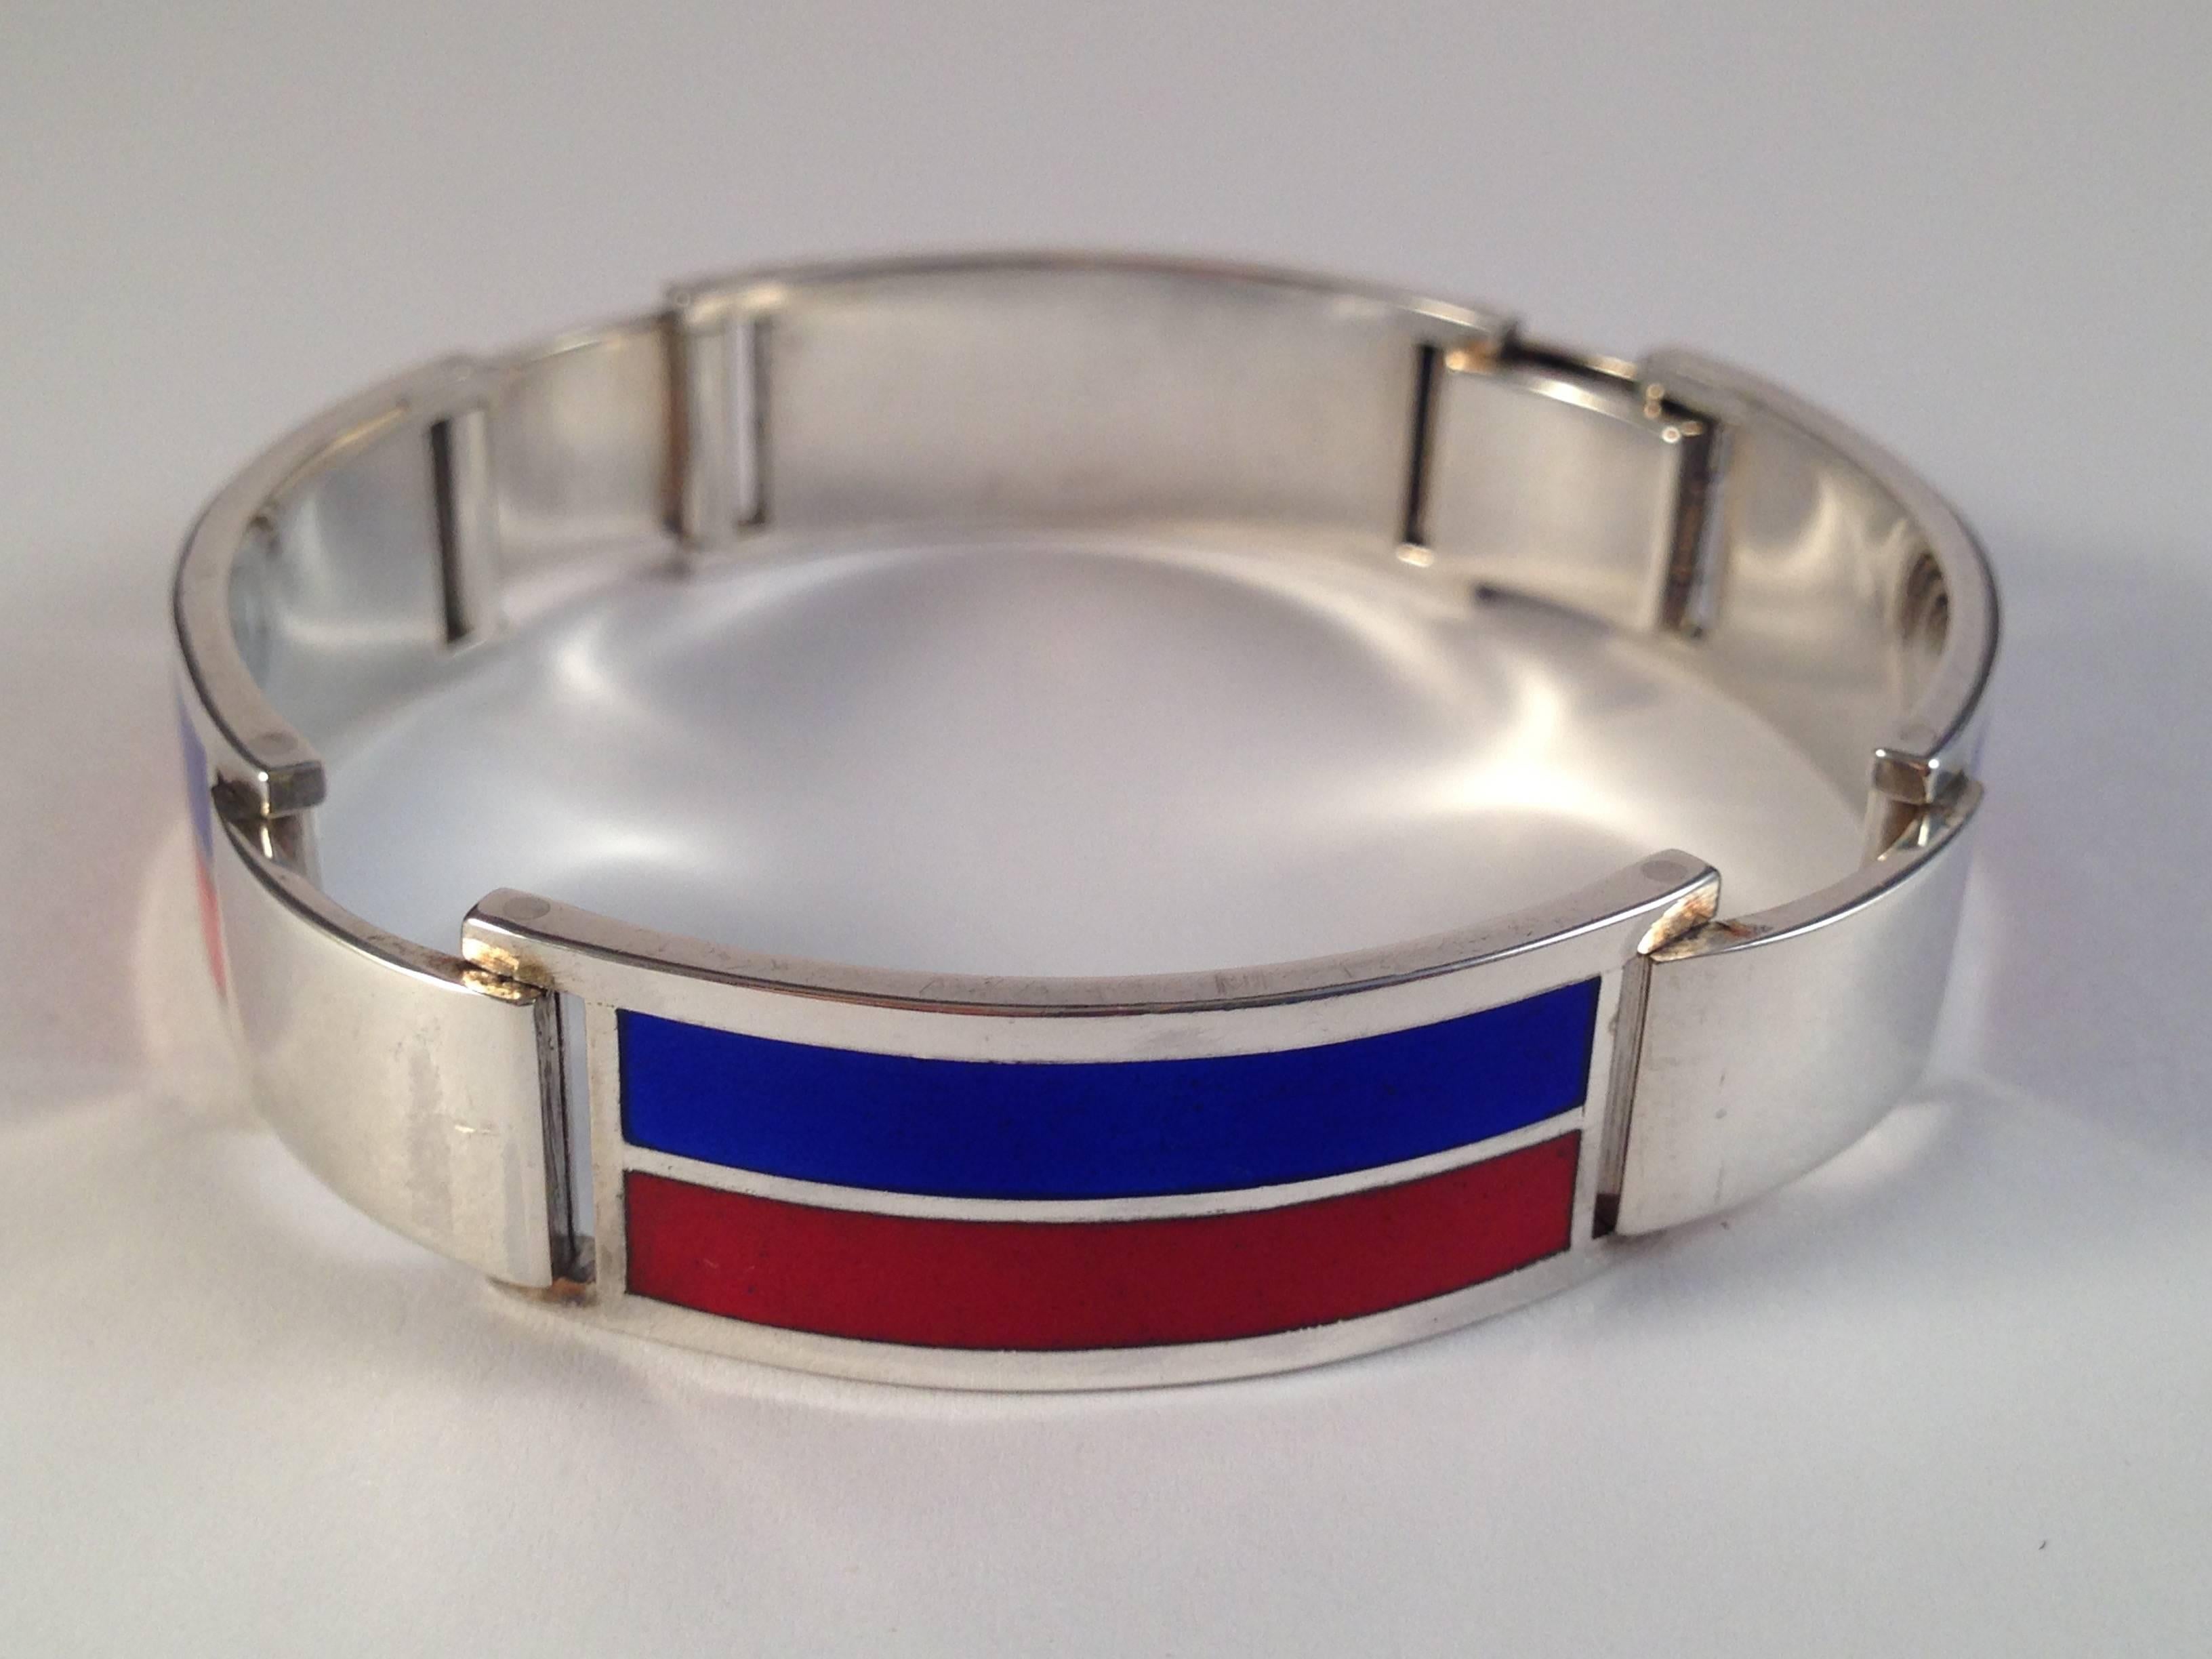 This is an amazing 1970s Gucci sterling bracelet with red and blue enamel stripes. It is for a small wrist. Once fastened the inside circumference measures 6 3/8